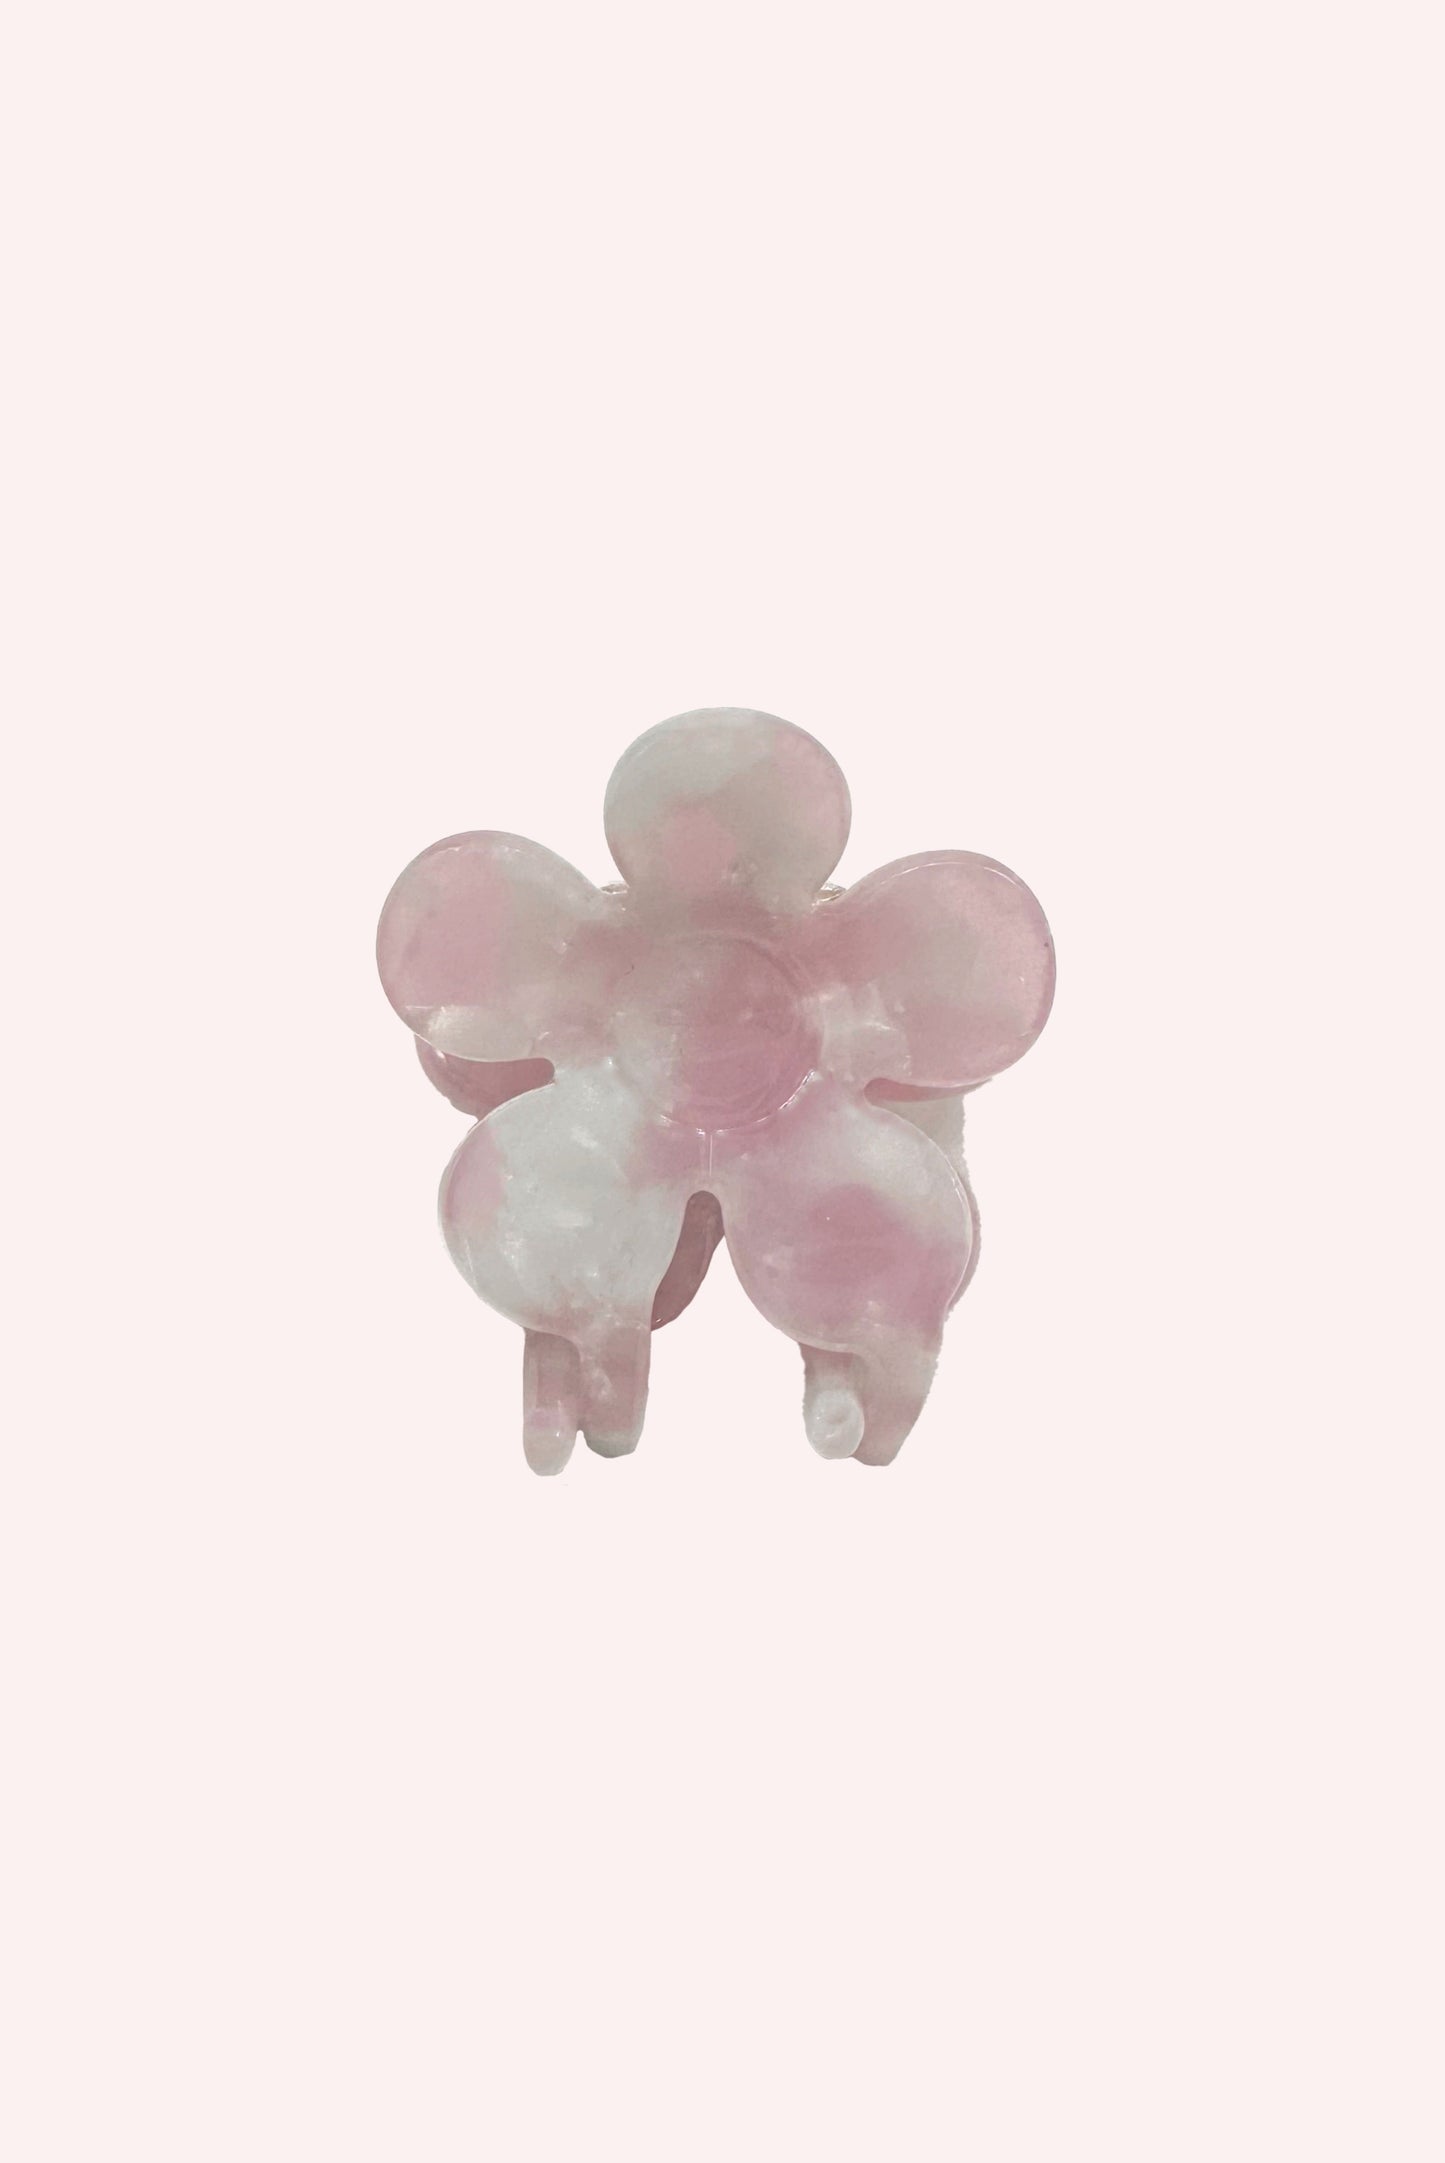 Petite Forget Me Not Flower Clip, Rose Quartz, top petal flower is with a mechanism for strong grip